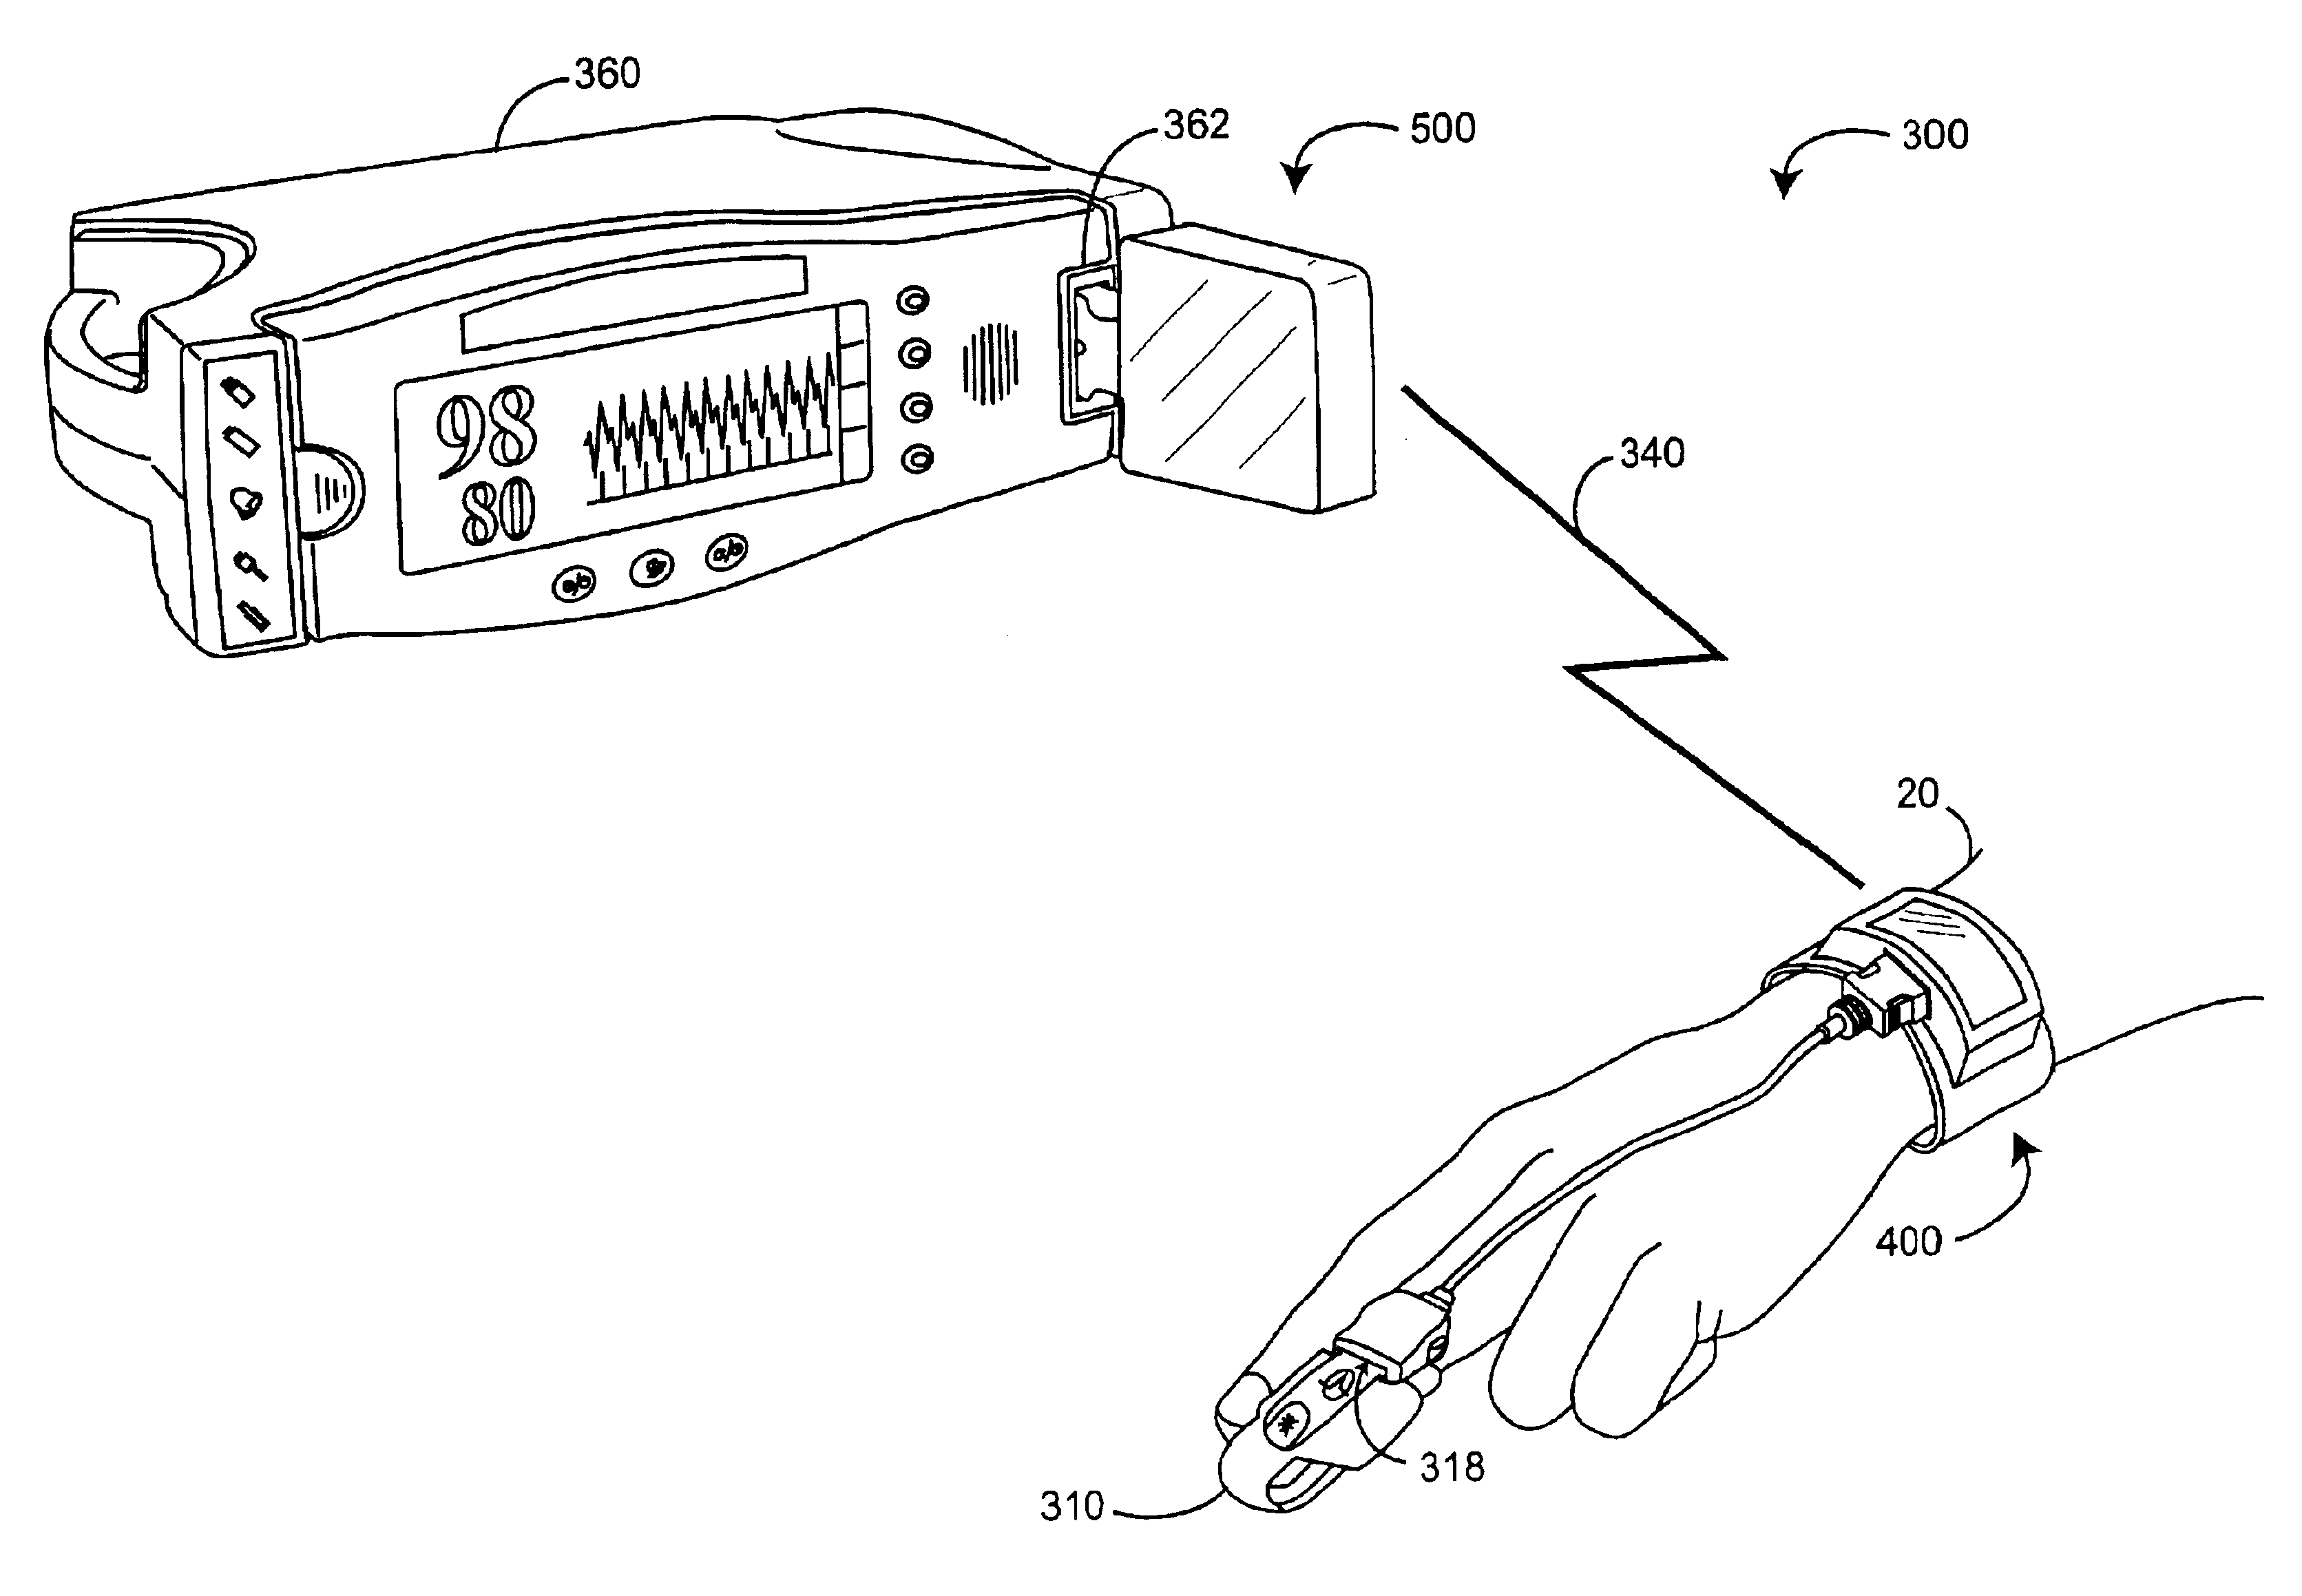 Physiological measurement communications adapter